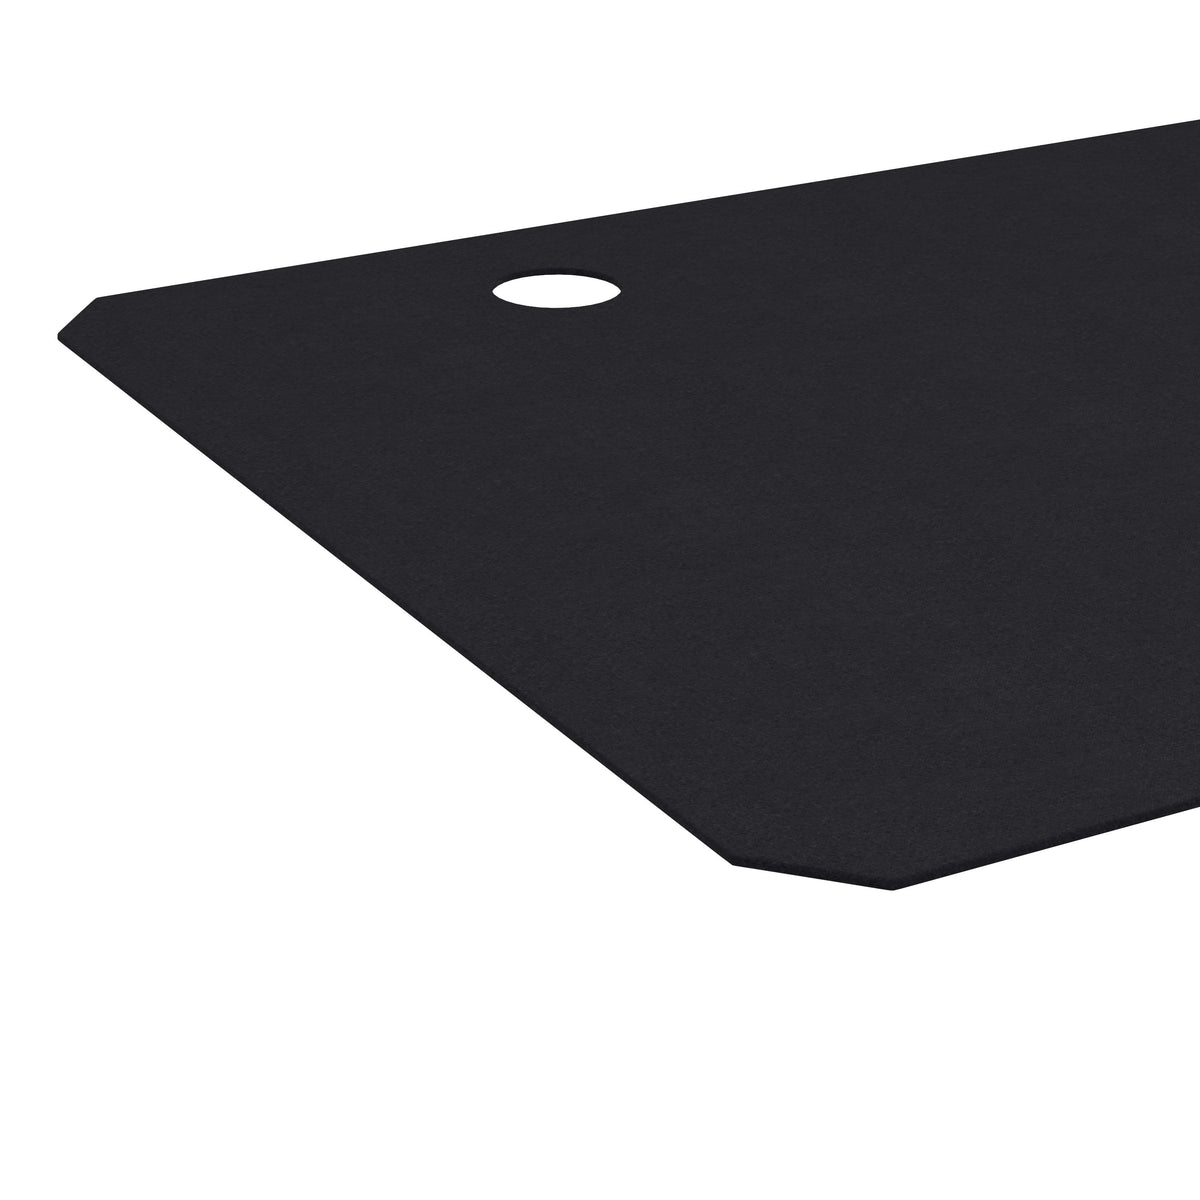 Full Desktop Anti-Slip Rubber Mouse Pad with Micro Weave Surface in Black